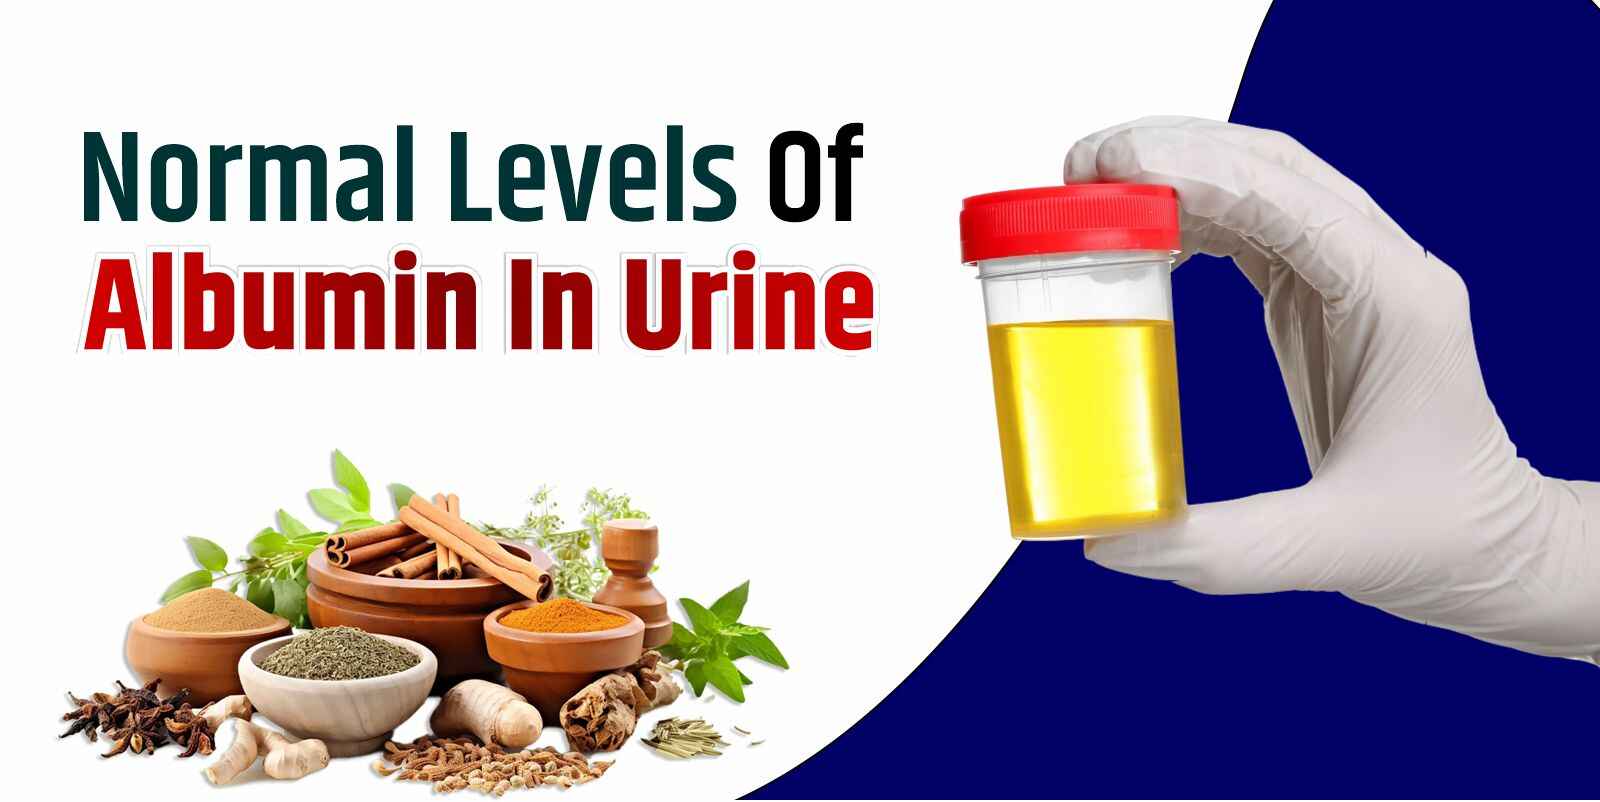 Normal Levels Of Albumin In Urine